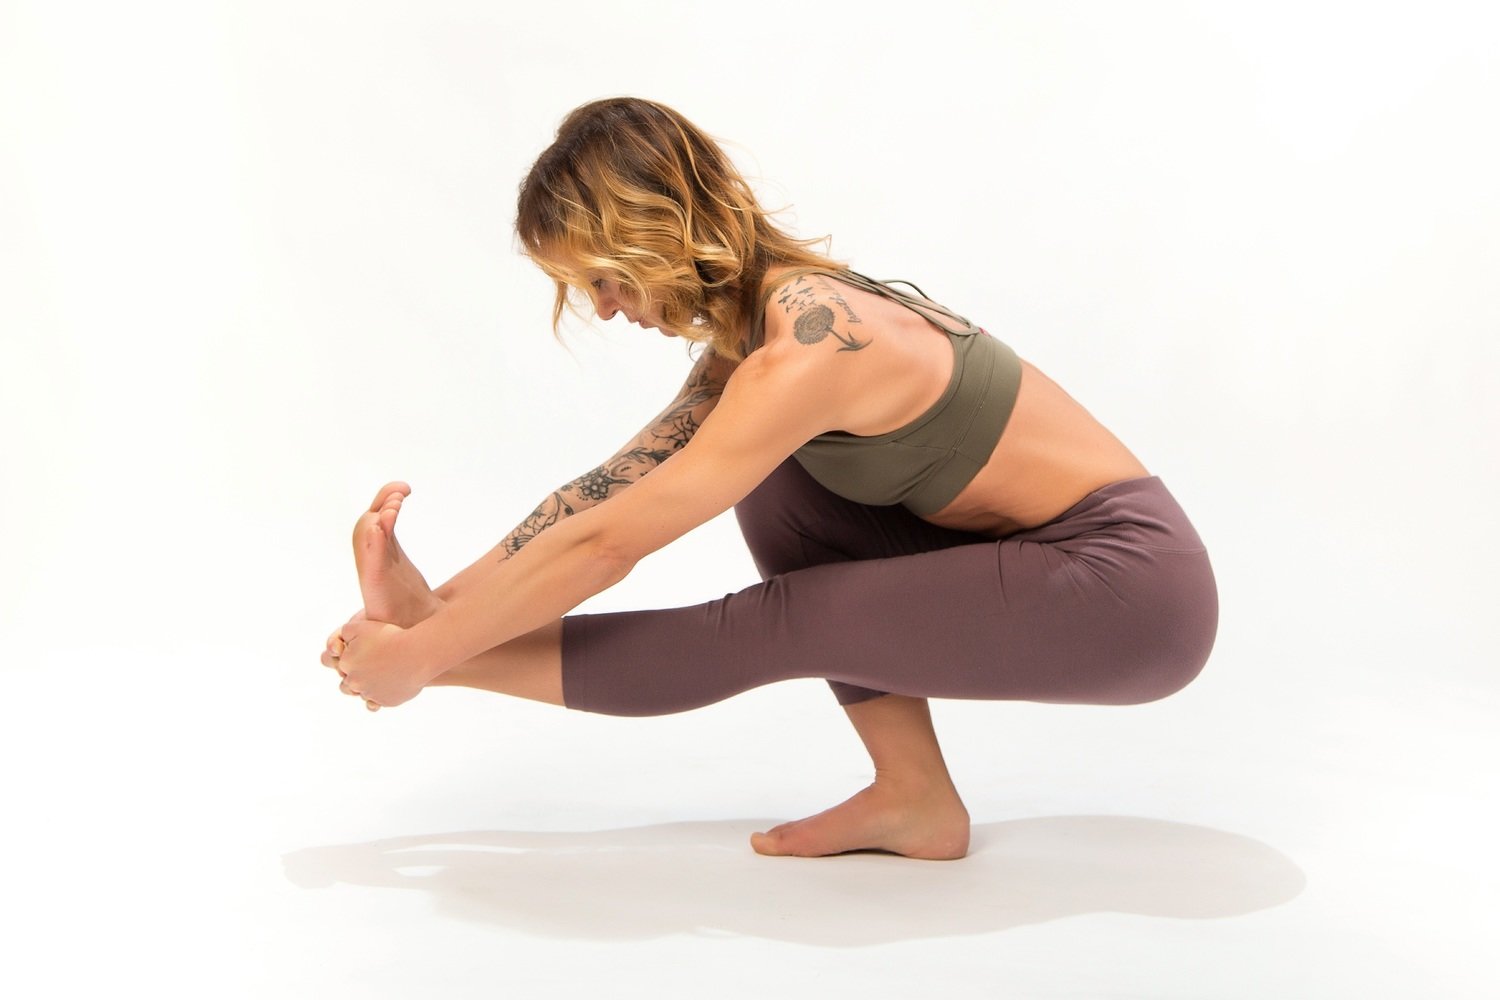 Your First Yoga Class with Gina at the Putnam studio